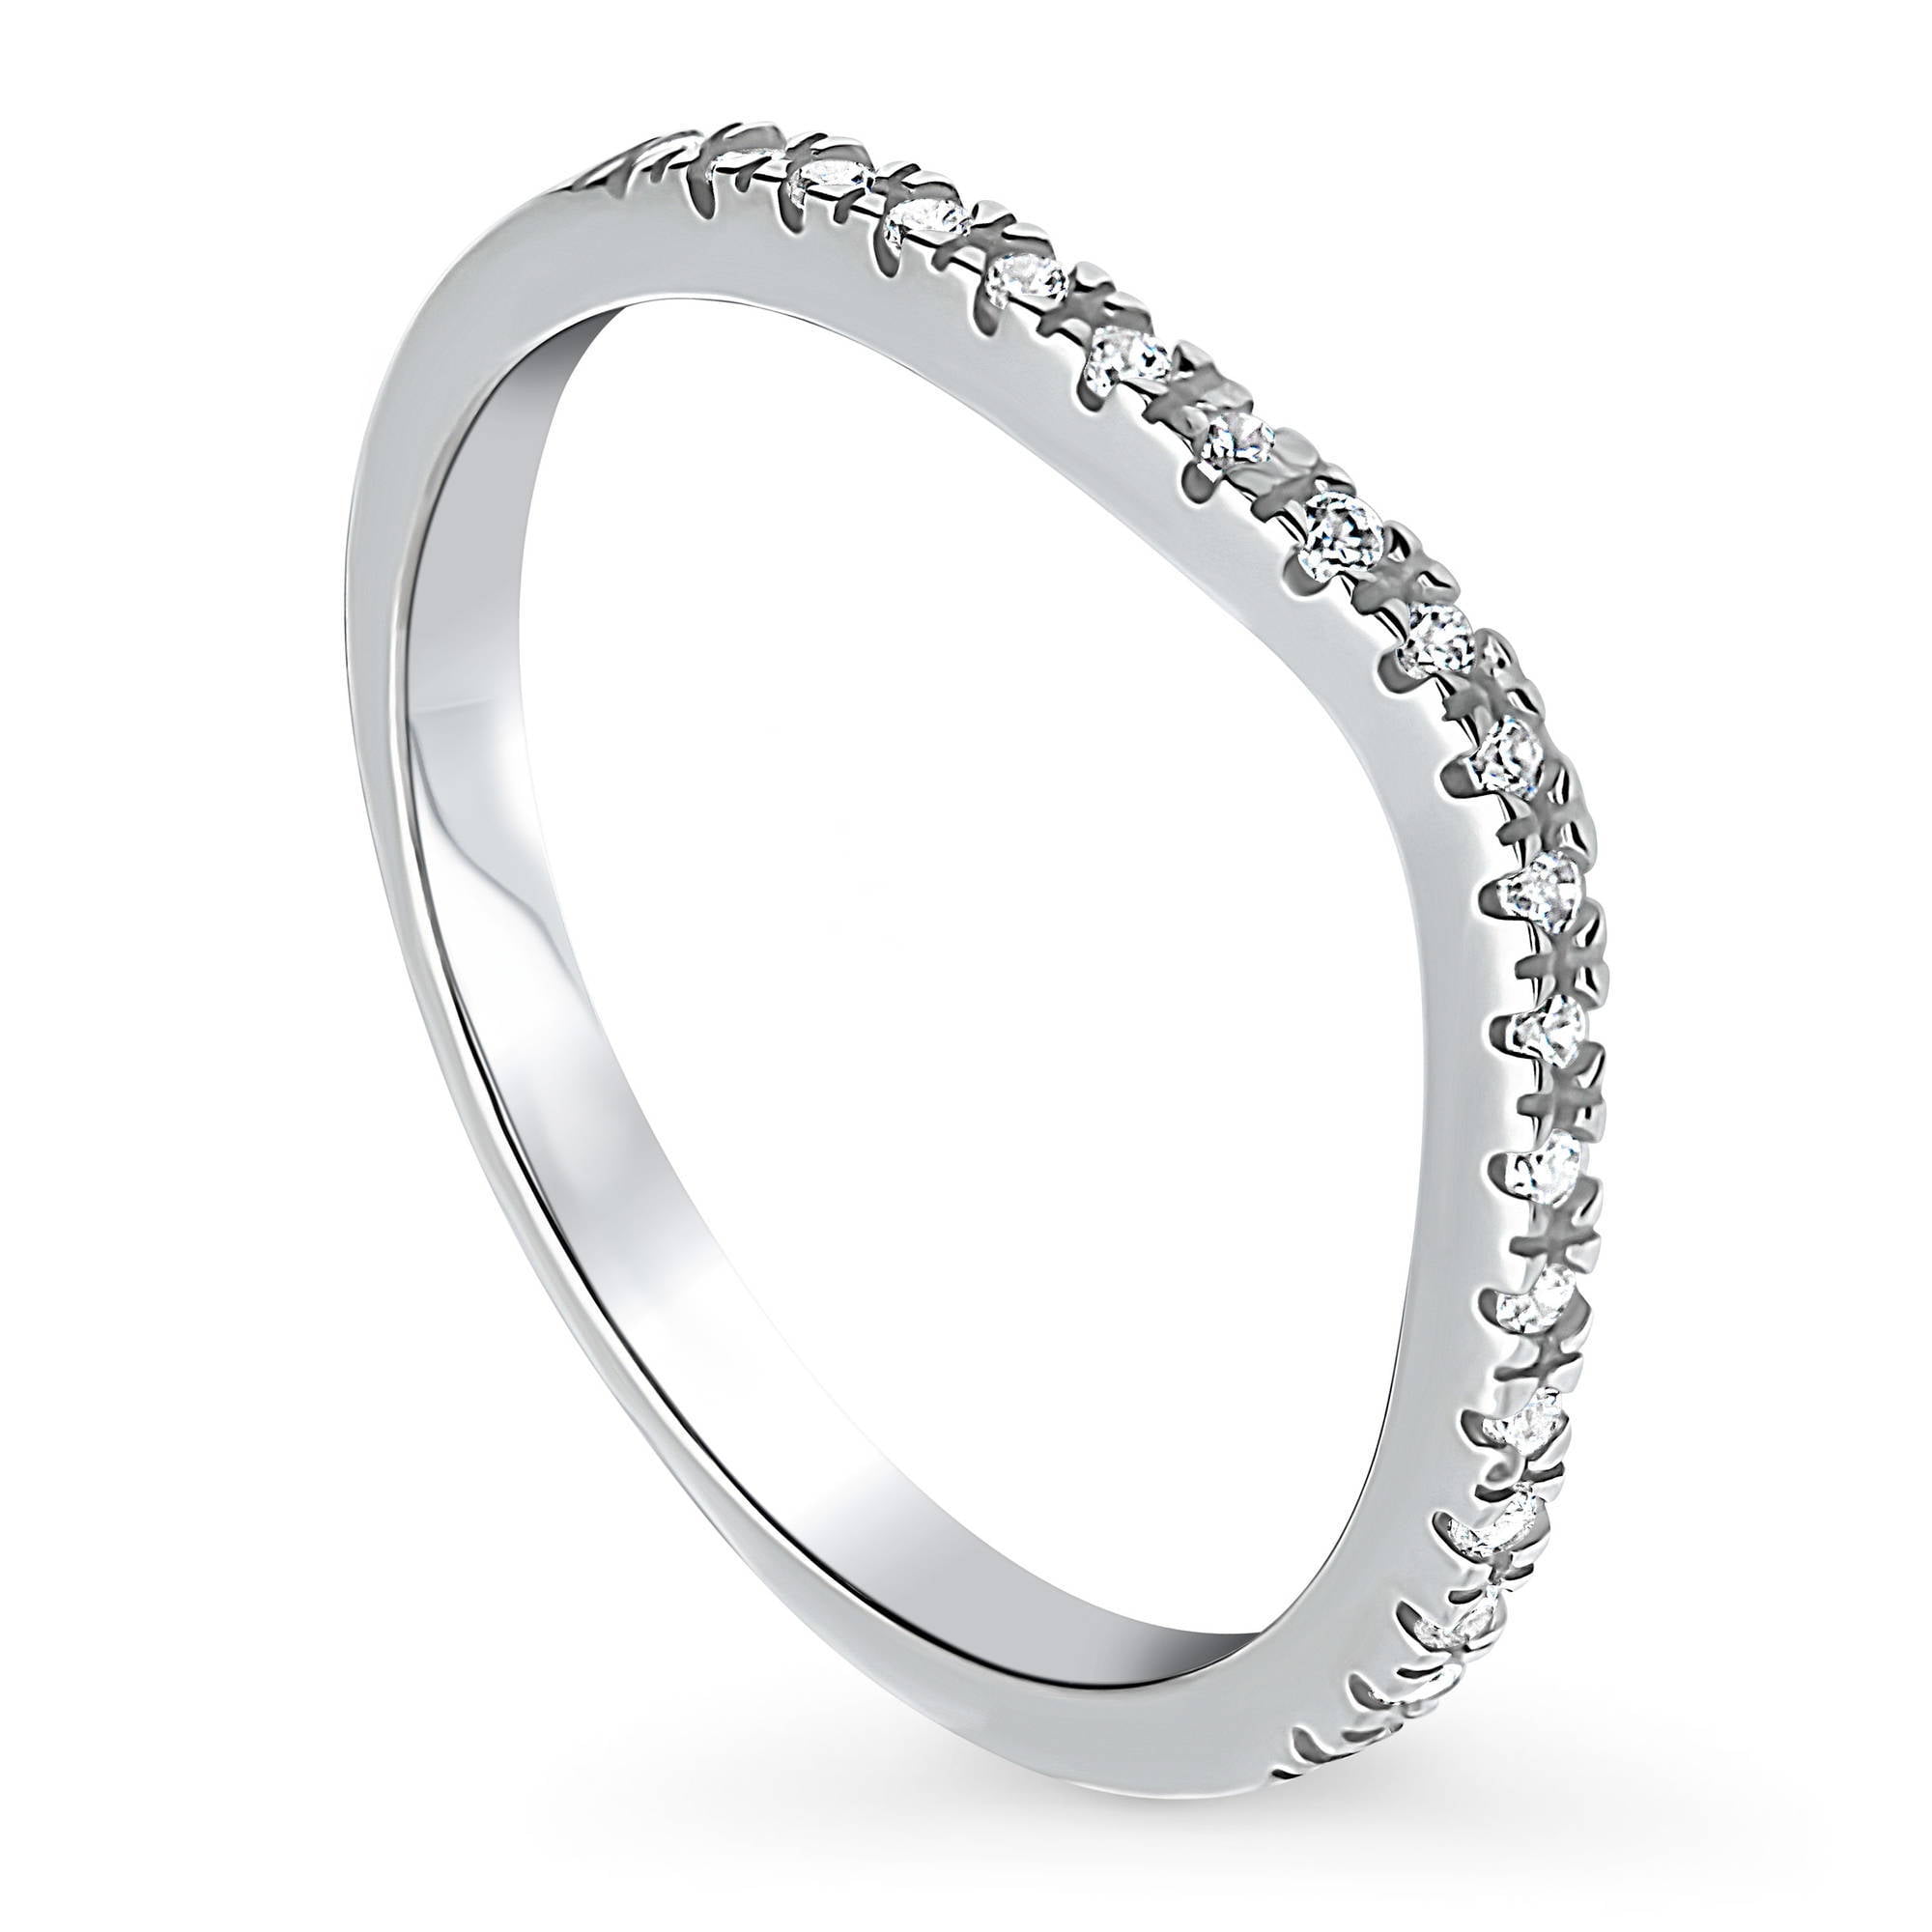 BERRICLE Rhodium Plated Sterling Silver Channel Set Cubic Zirconia CZ Wedding Curved Half Eternity Band Ring 